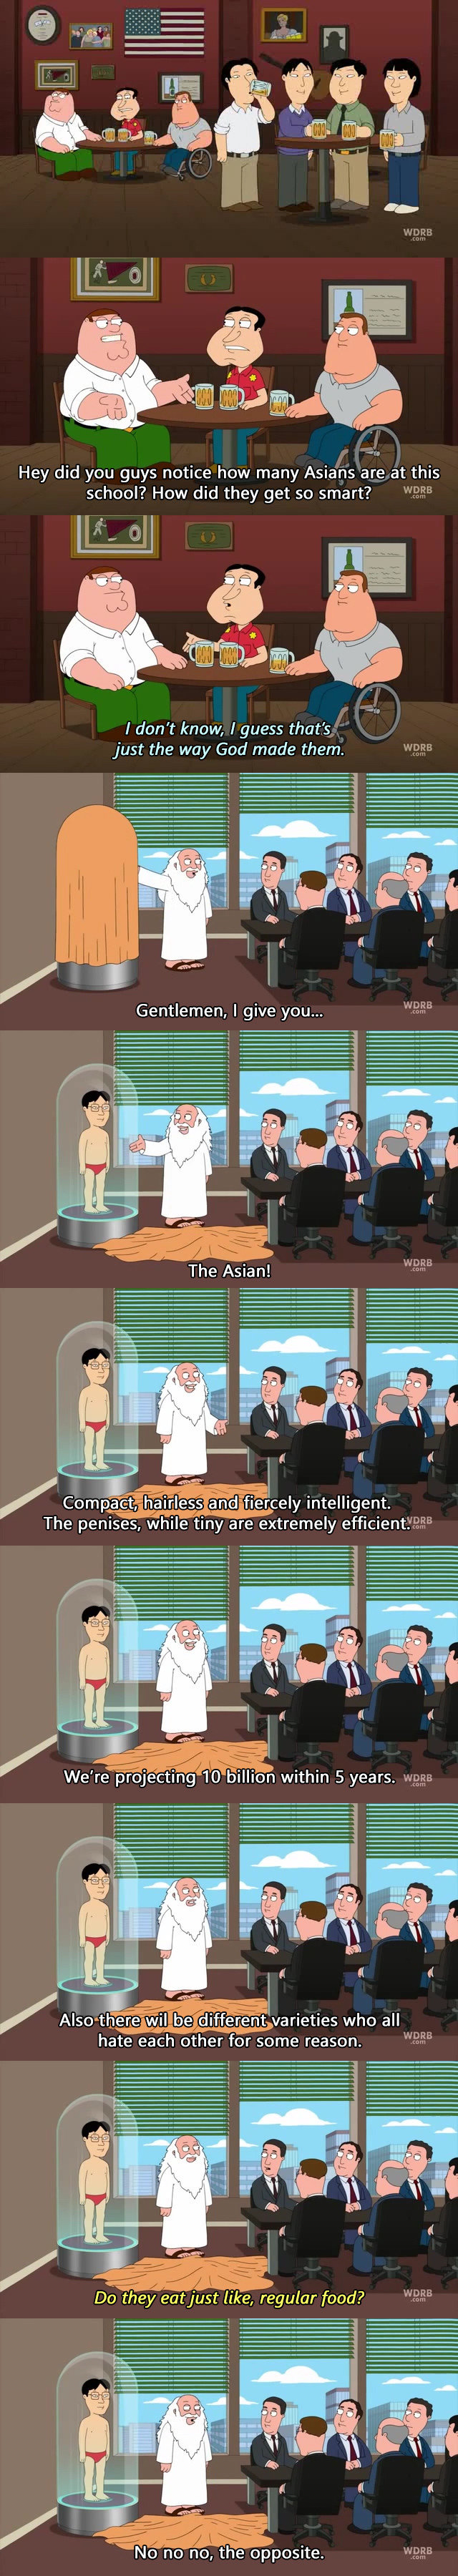 How asians were created